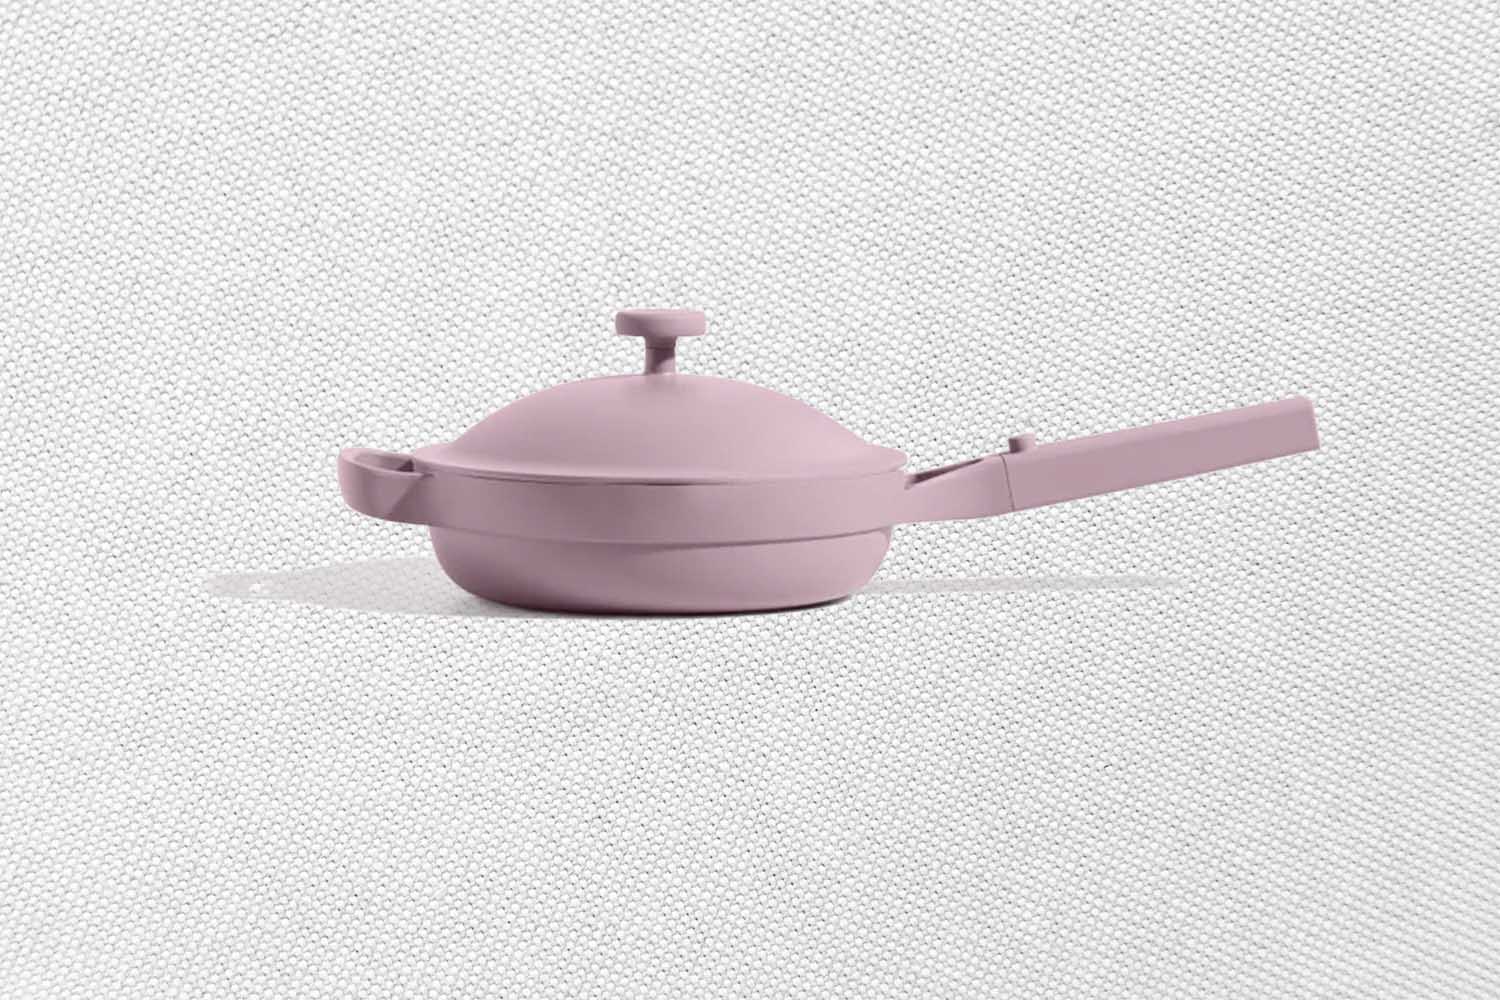 Our Place Mini Always Pan, one of the best women's gifts to give this September